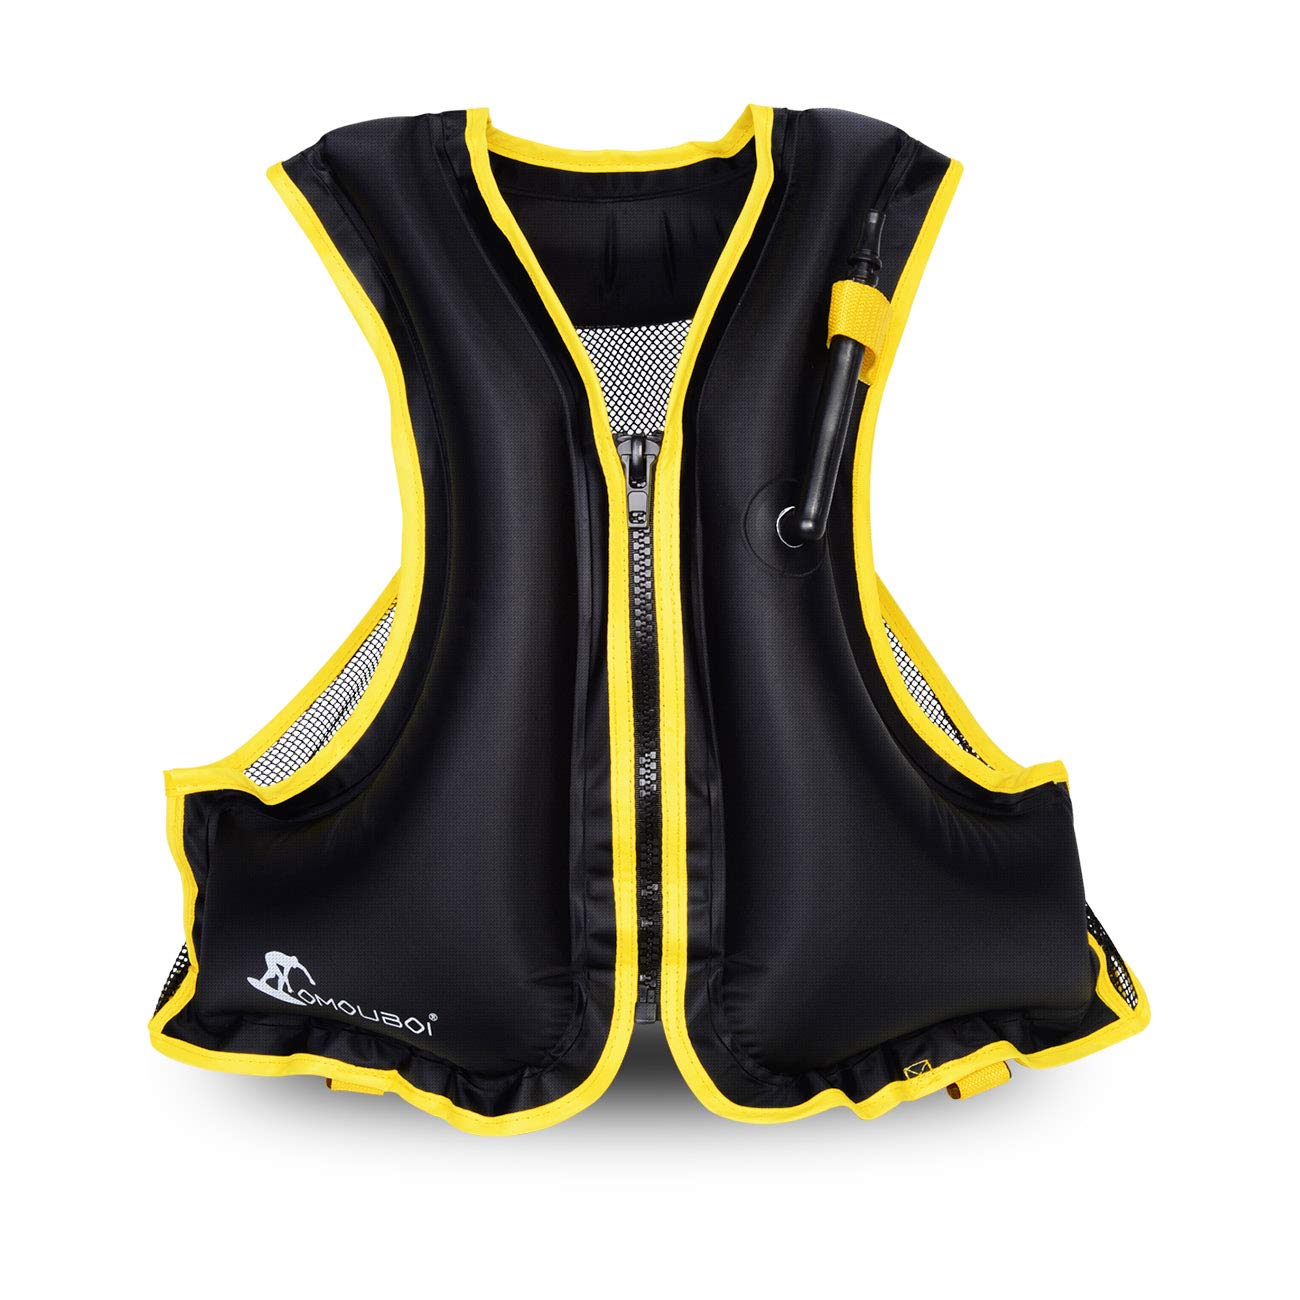 KIRFIZ Swim Jacket, Adult Vest Life Safety Jackets Weight Capacity 50-100  kg Swimming Jacket Floating Vest for Swimwear Swimming Fishing Boating  Drifting with Whistle & Crotch Straps : Amazon.in: Clothing & Accessories